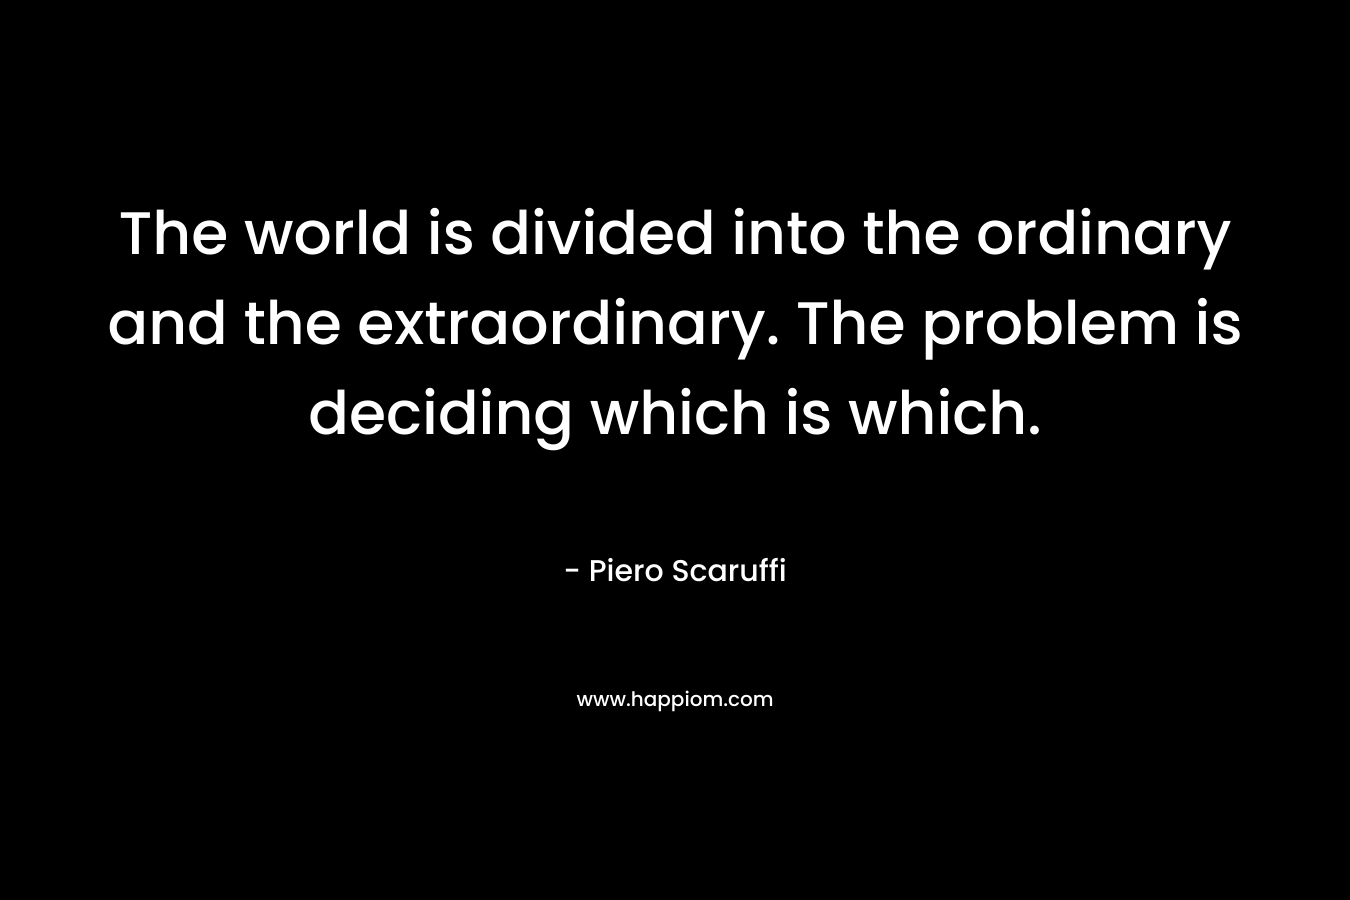 The world is divided into the ordinary and the extraordinary. The problem is deciding which is which. – Piero Scaruffi